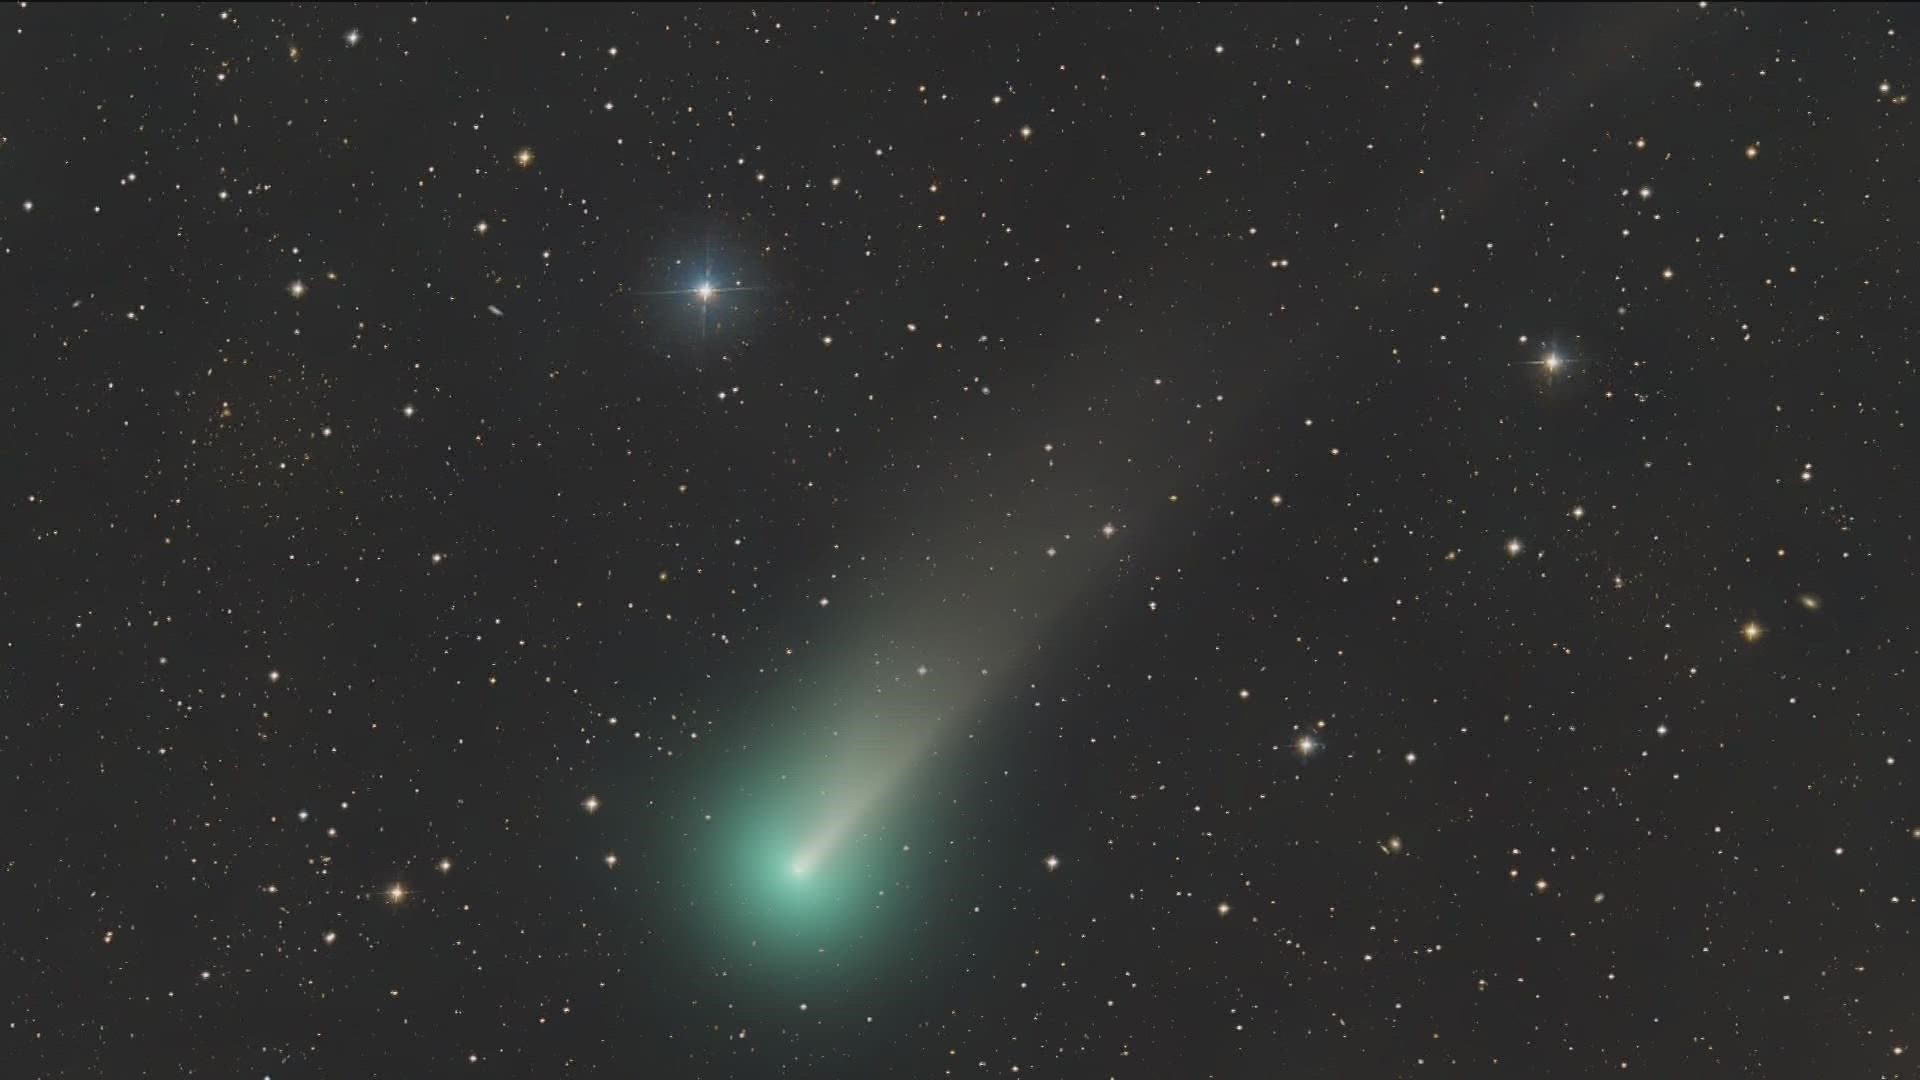 A newly discovered bright green comet is on its way past Earth for a once-in-a-lifetime show, which may be visible to the naked eye.